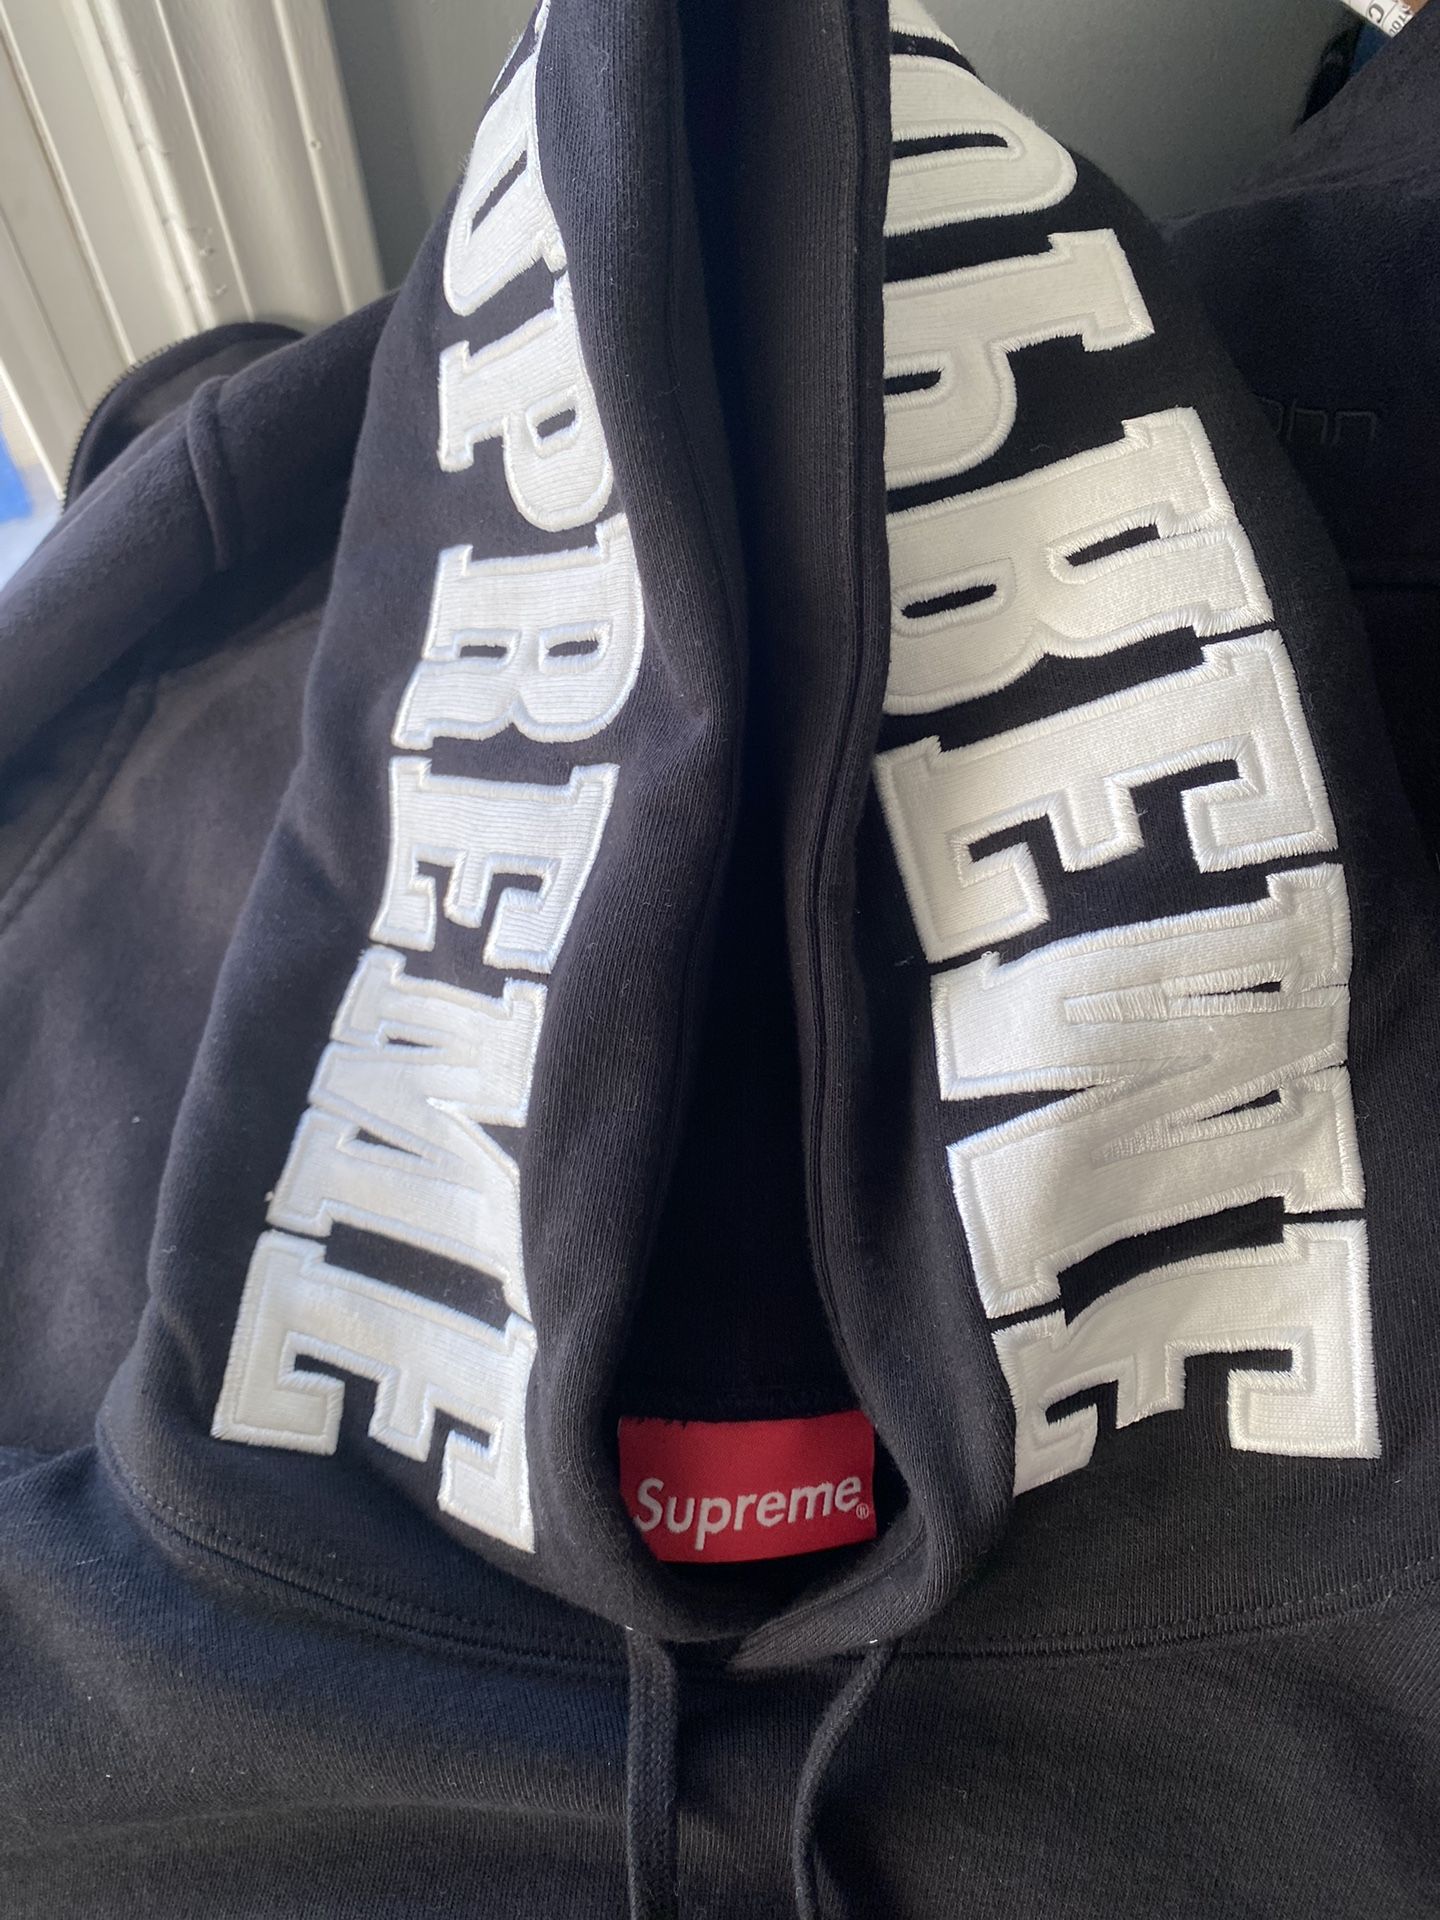 Supreme Hoodie *Authentic* Size Large